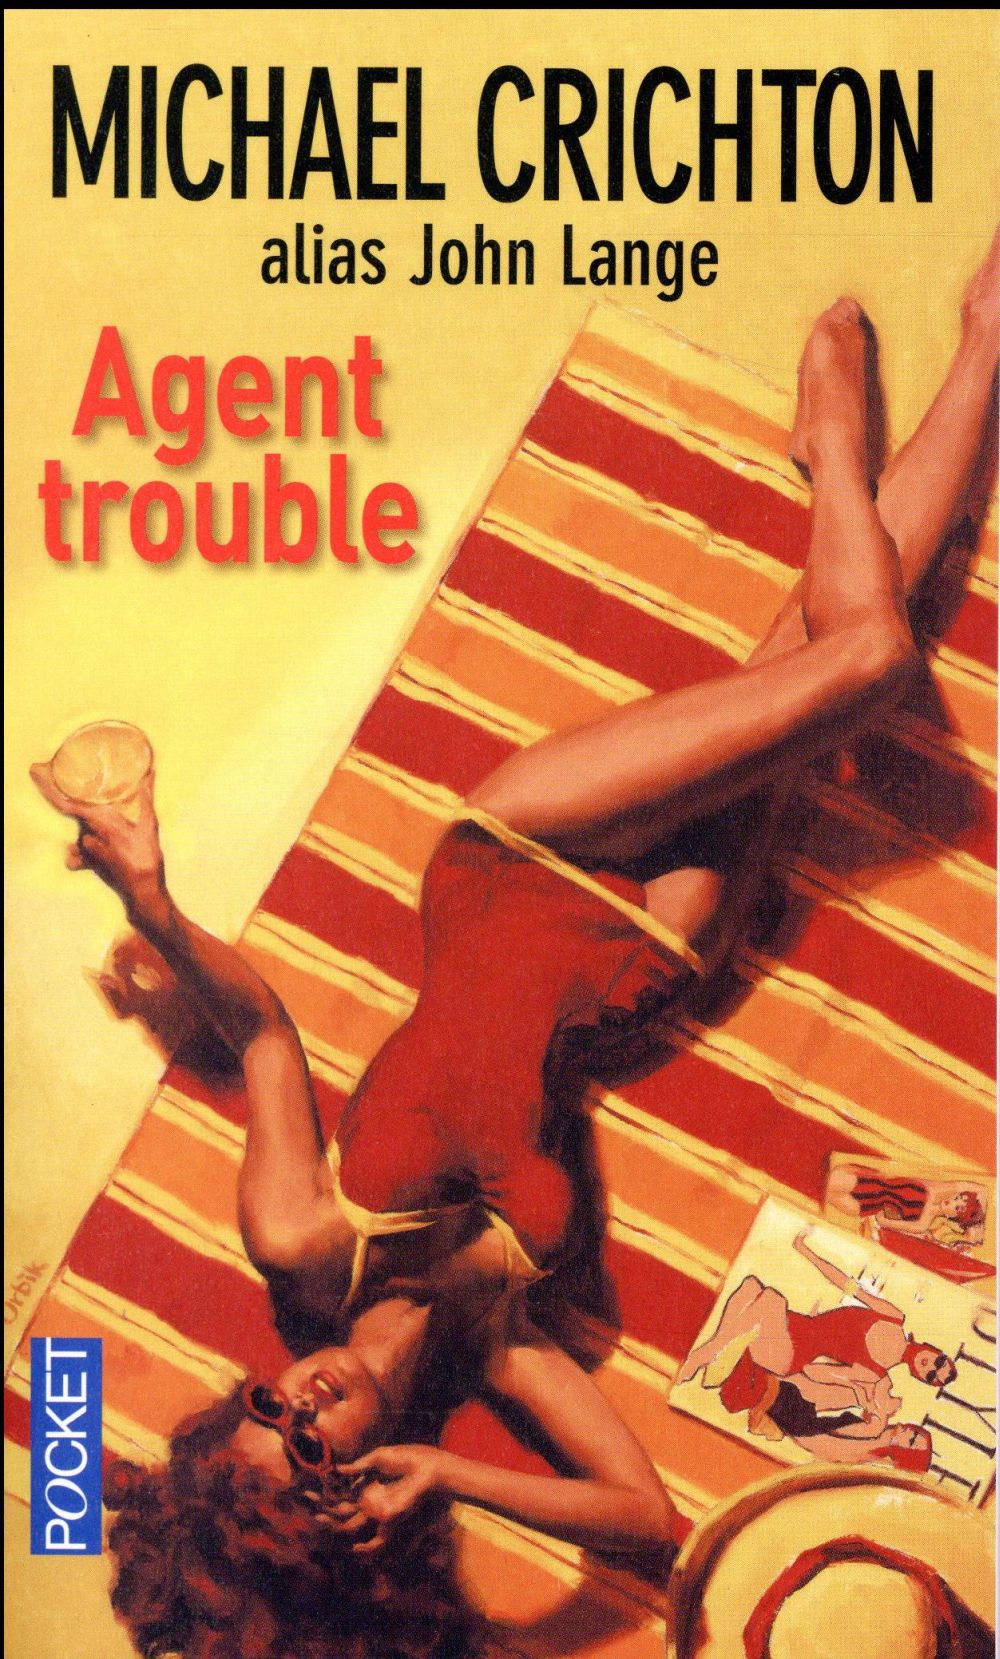 AGENT TROUBLE